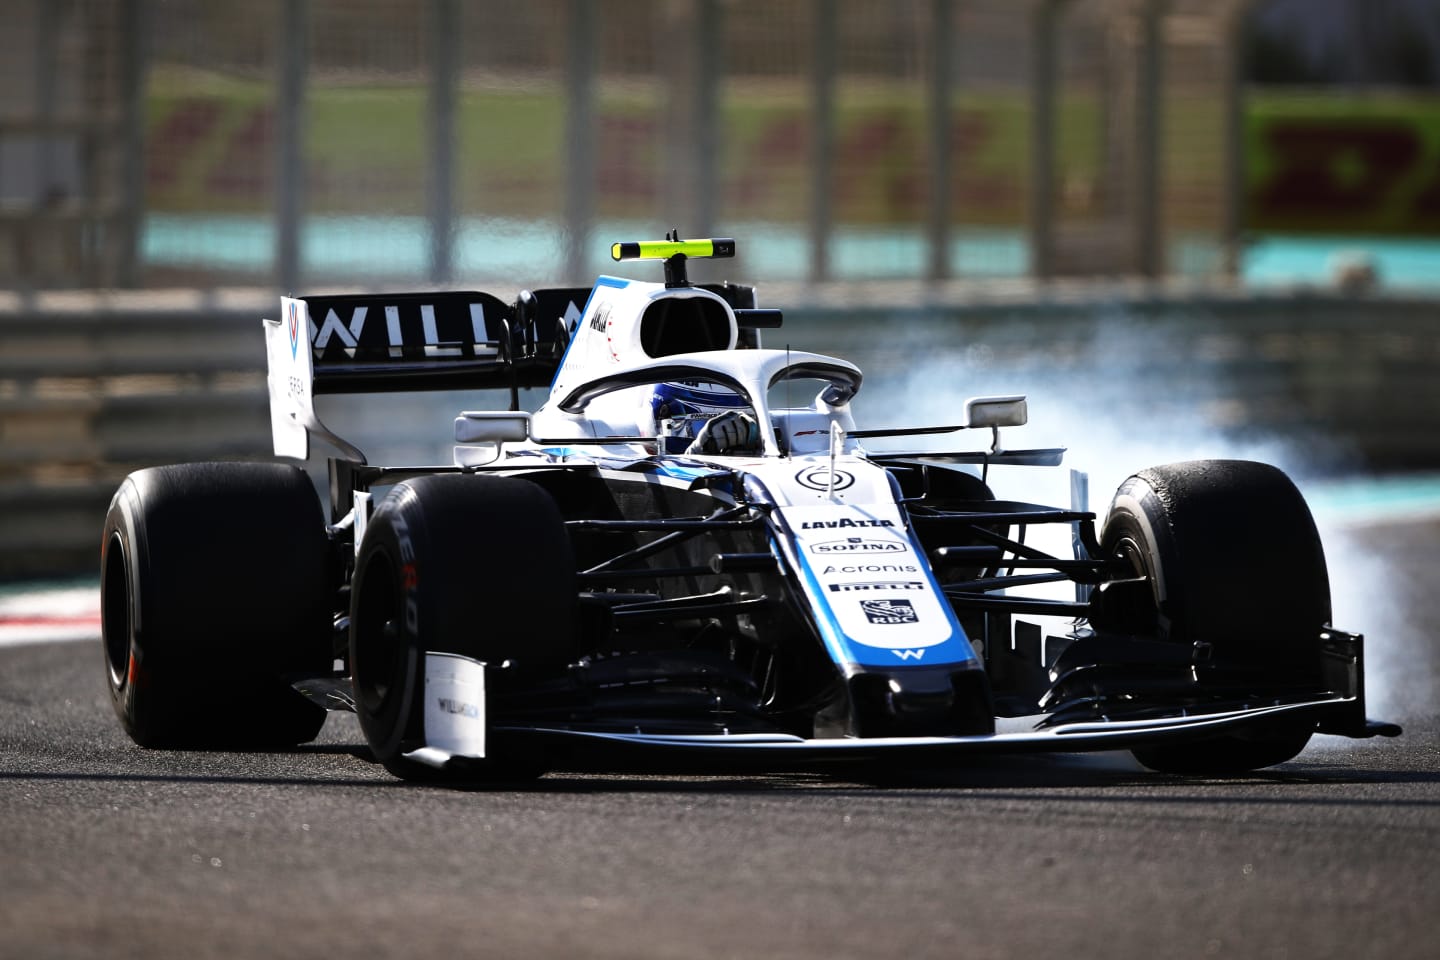 ABU DHABI, UNITED ARAB EMIRATES - DECEMBER 11: Nicholas Latifi of Canada driving the (6) Williams Racing FW43 Mercedes locks up during practice ahead of the F1 Grand Prix of Abu Dhabi at Yas Marina Circuit on December 11, 2020 in Abu Dhabi, United Arab Emirates. (Photo by Bryn Lennon/Getty Images)